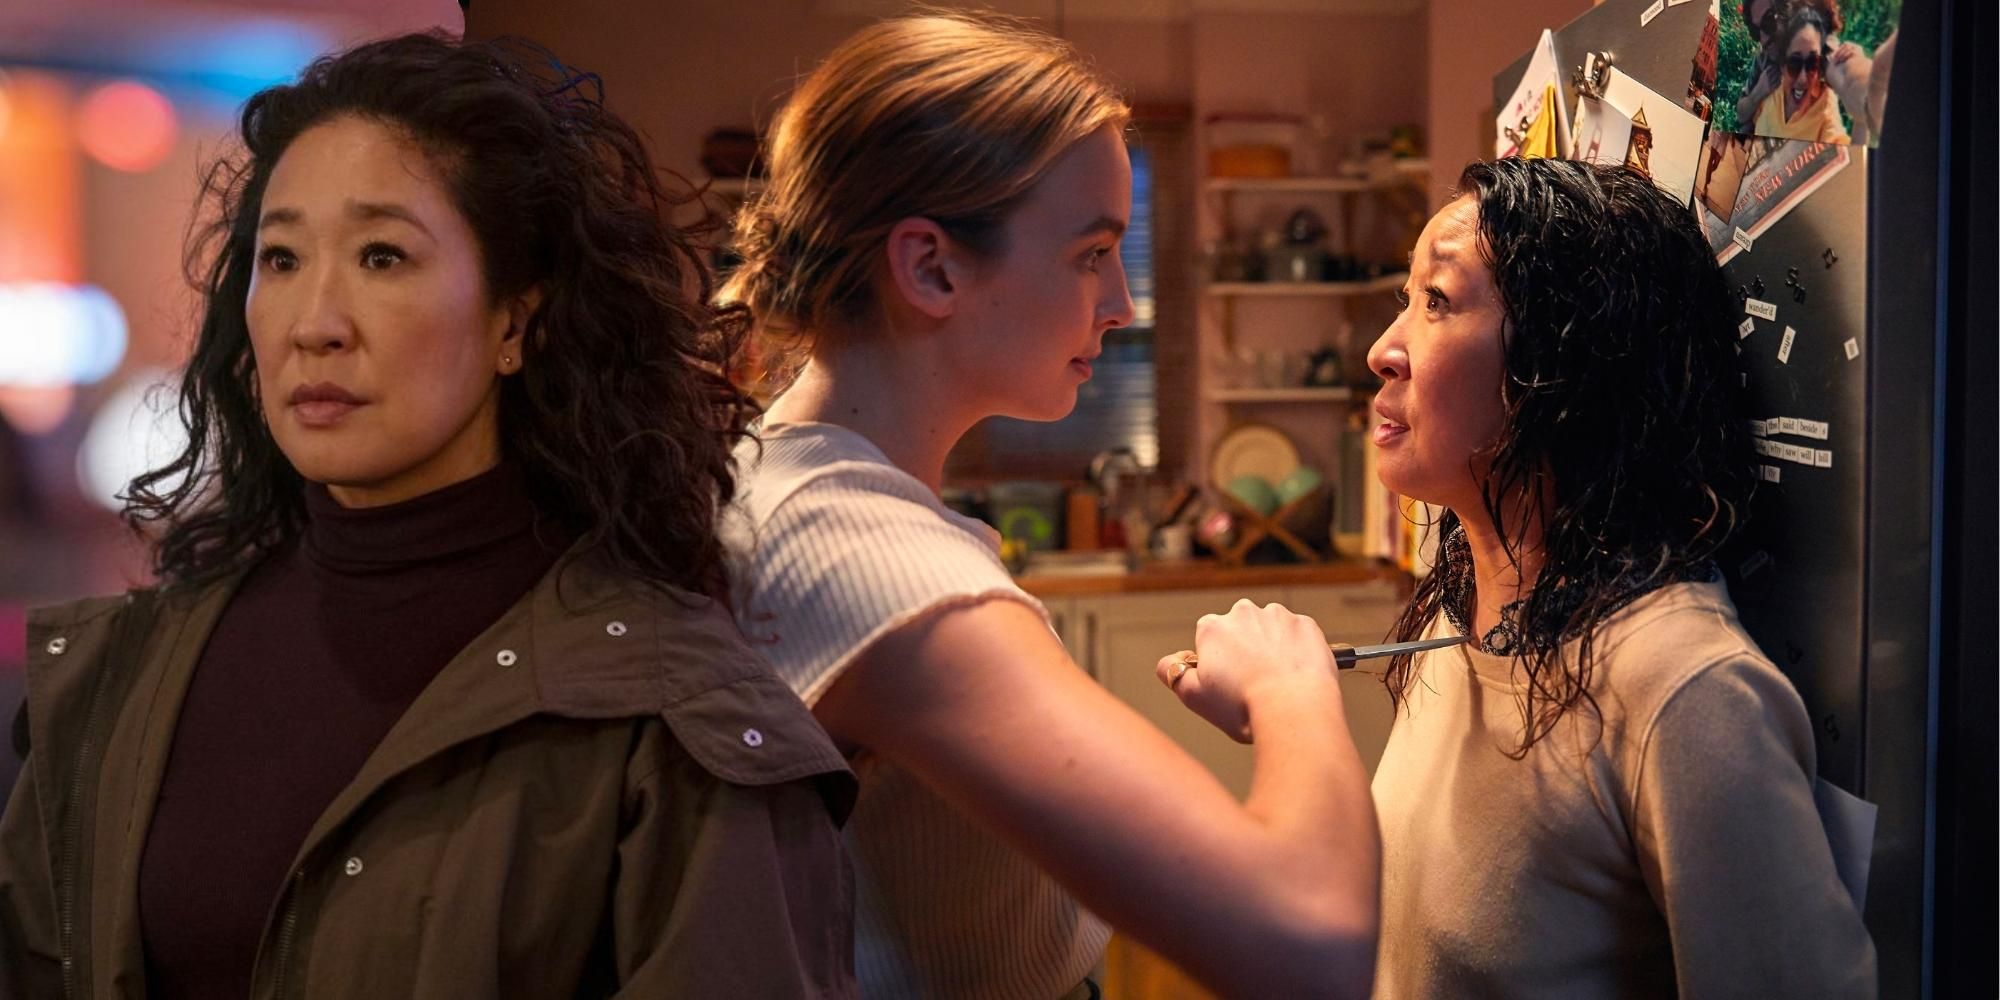 Sandra Oh, then held at knife point by Jodie Comer in Killing Eve